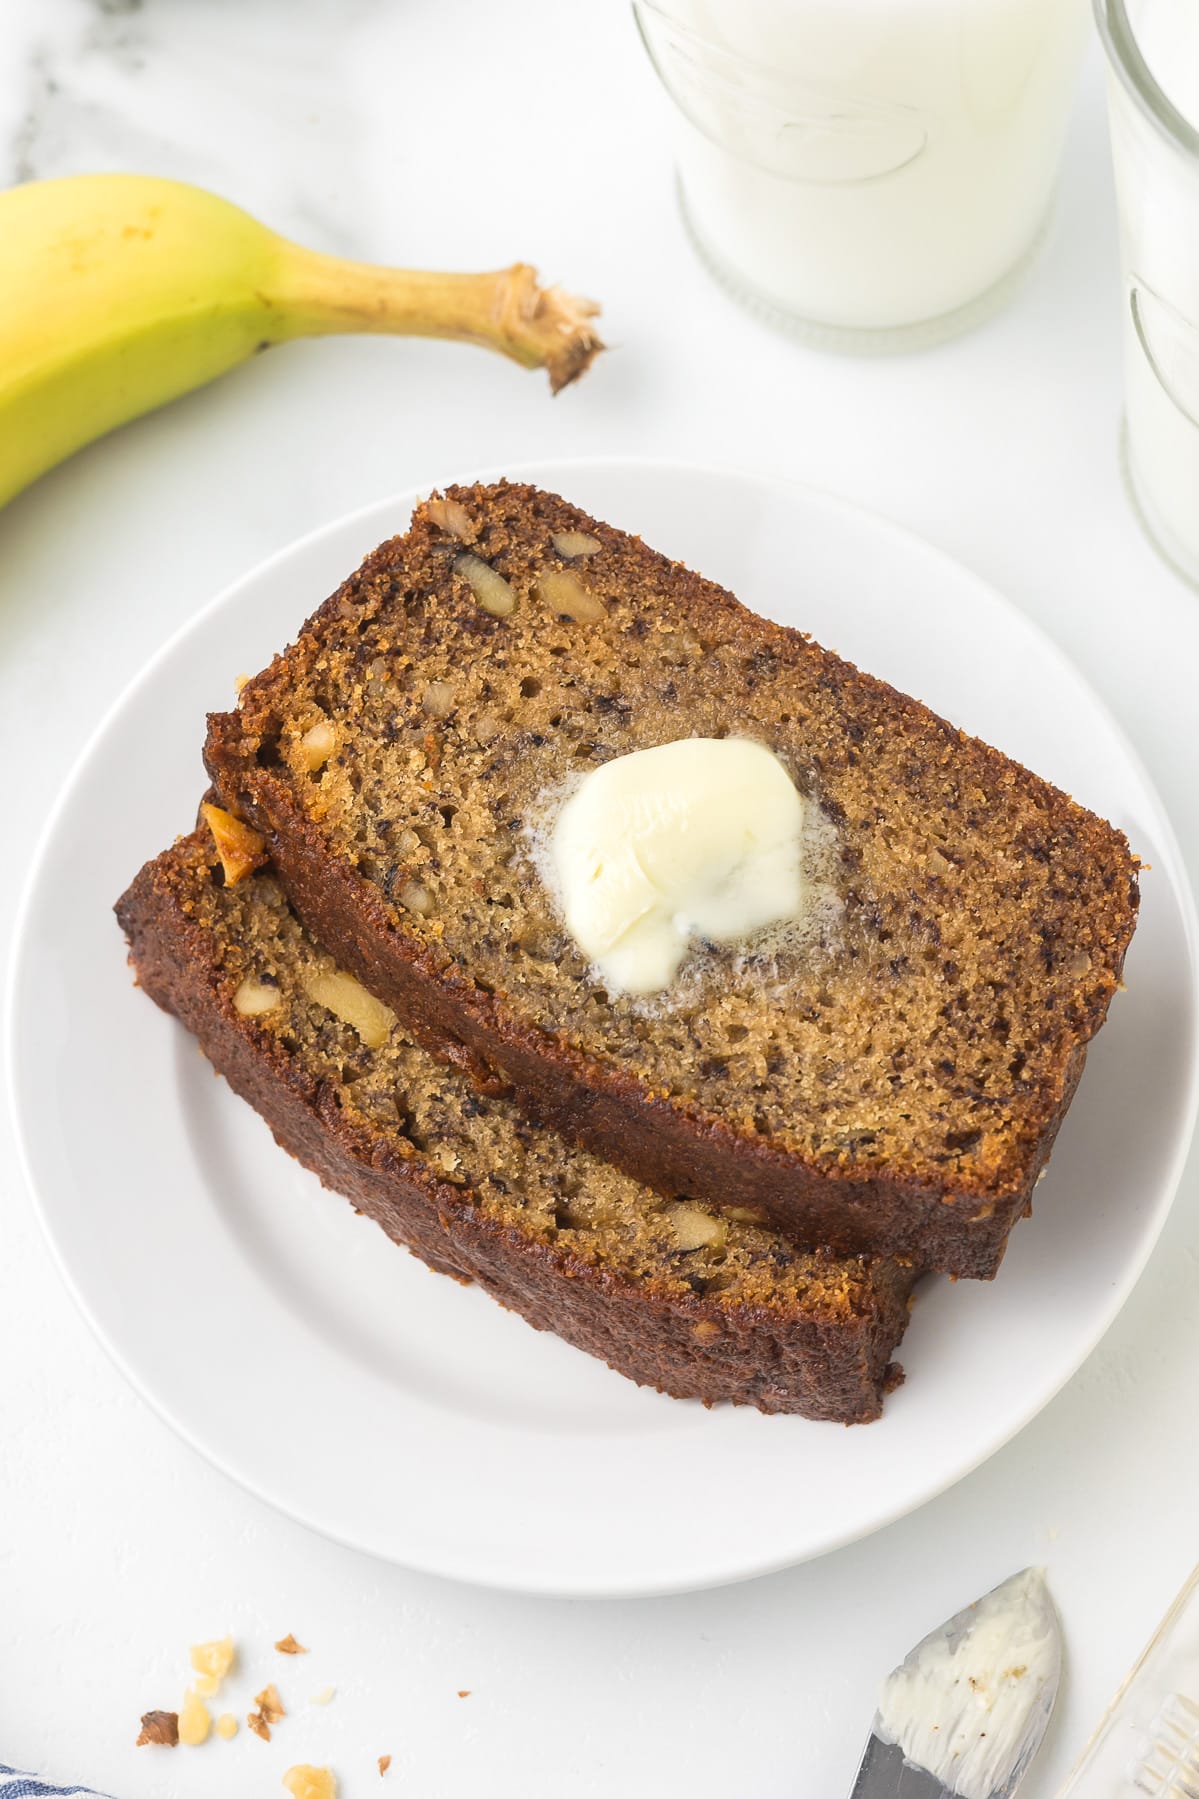 Two slices of banana bread with a pat of butter.